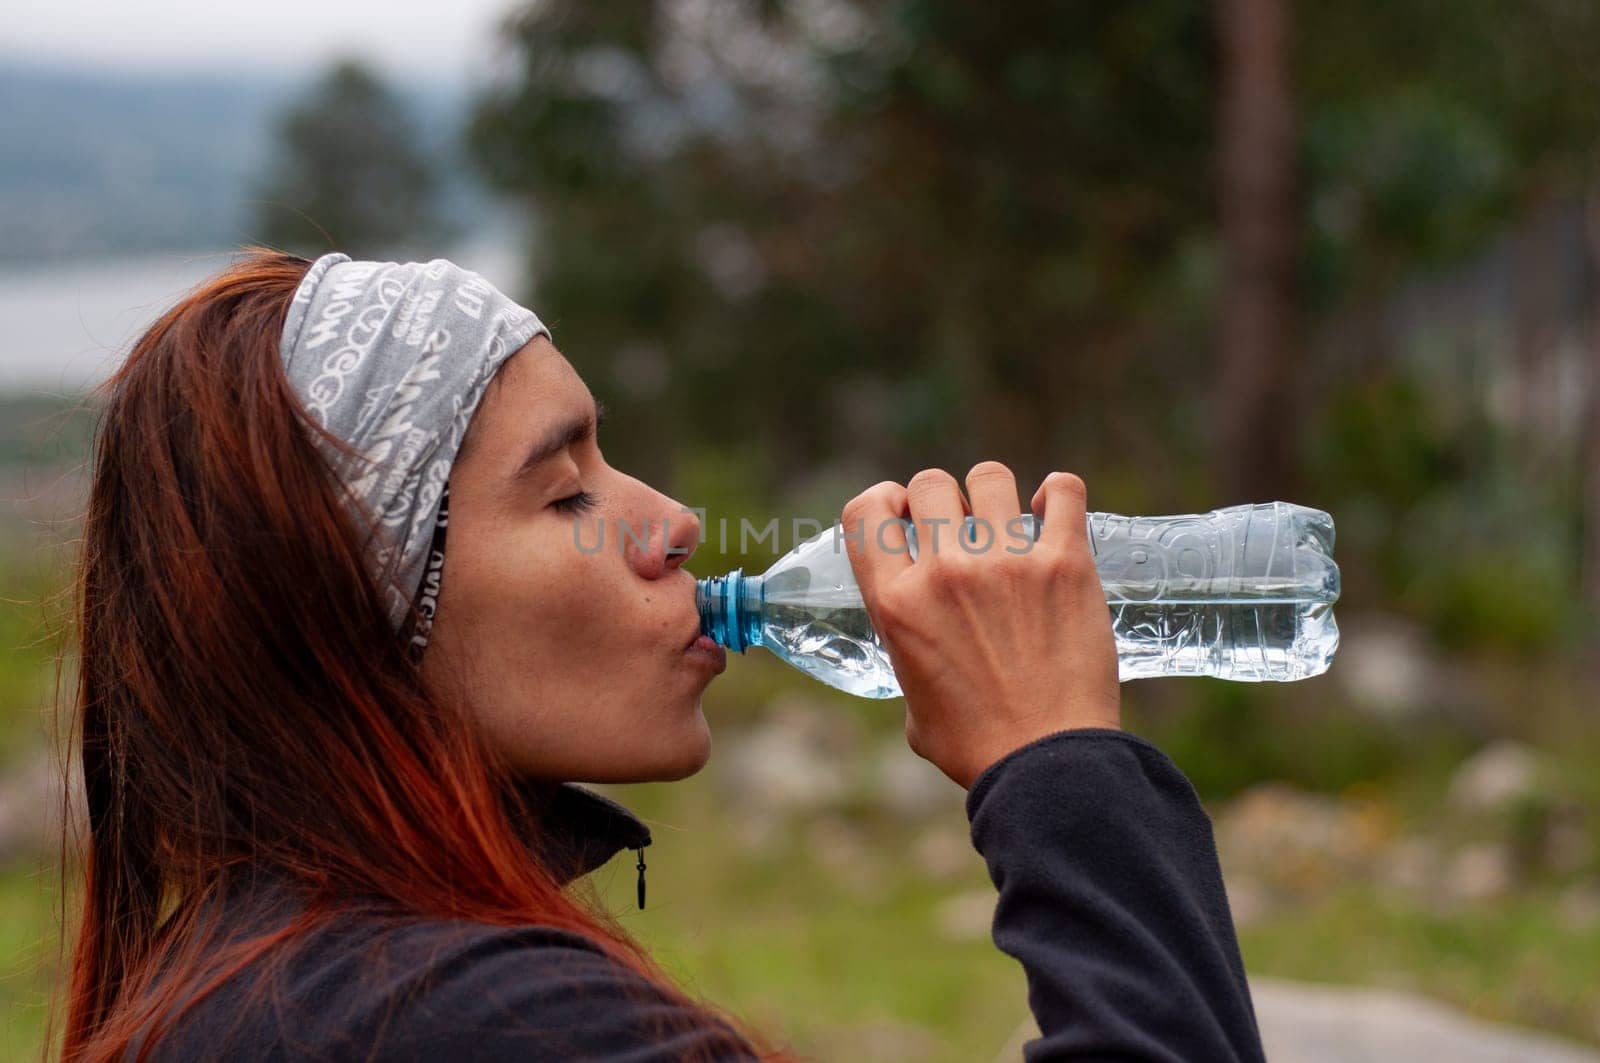 FIRST shot of sporty girl in the mountains drinking a bottle of water by Raulmartin